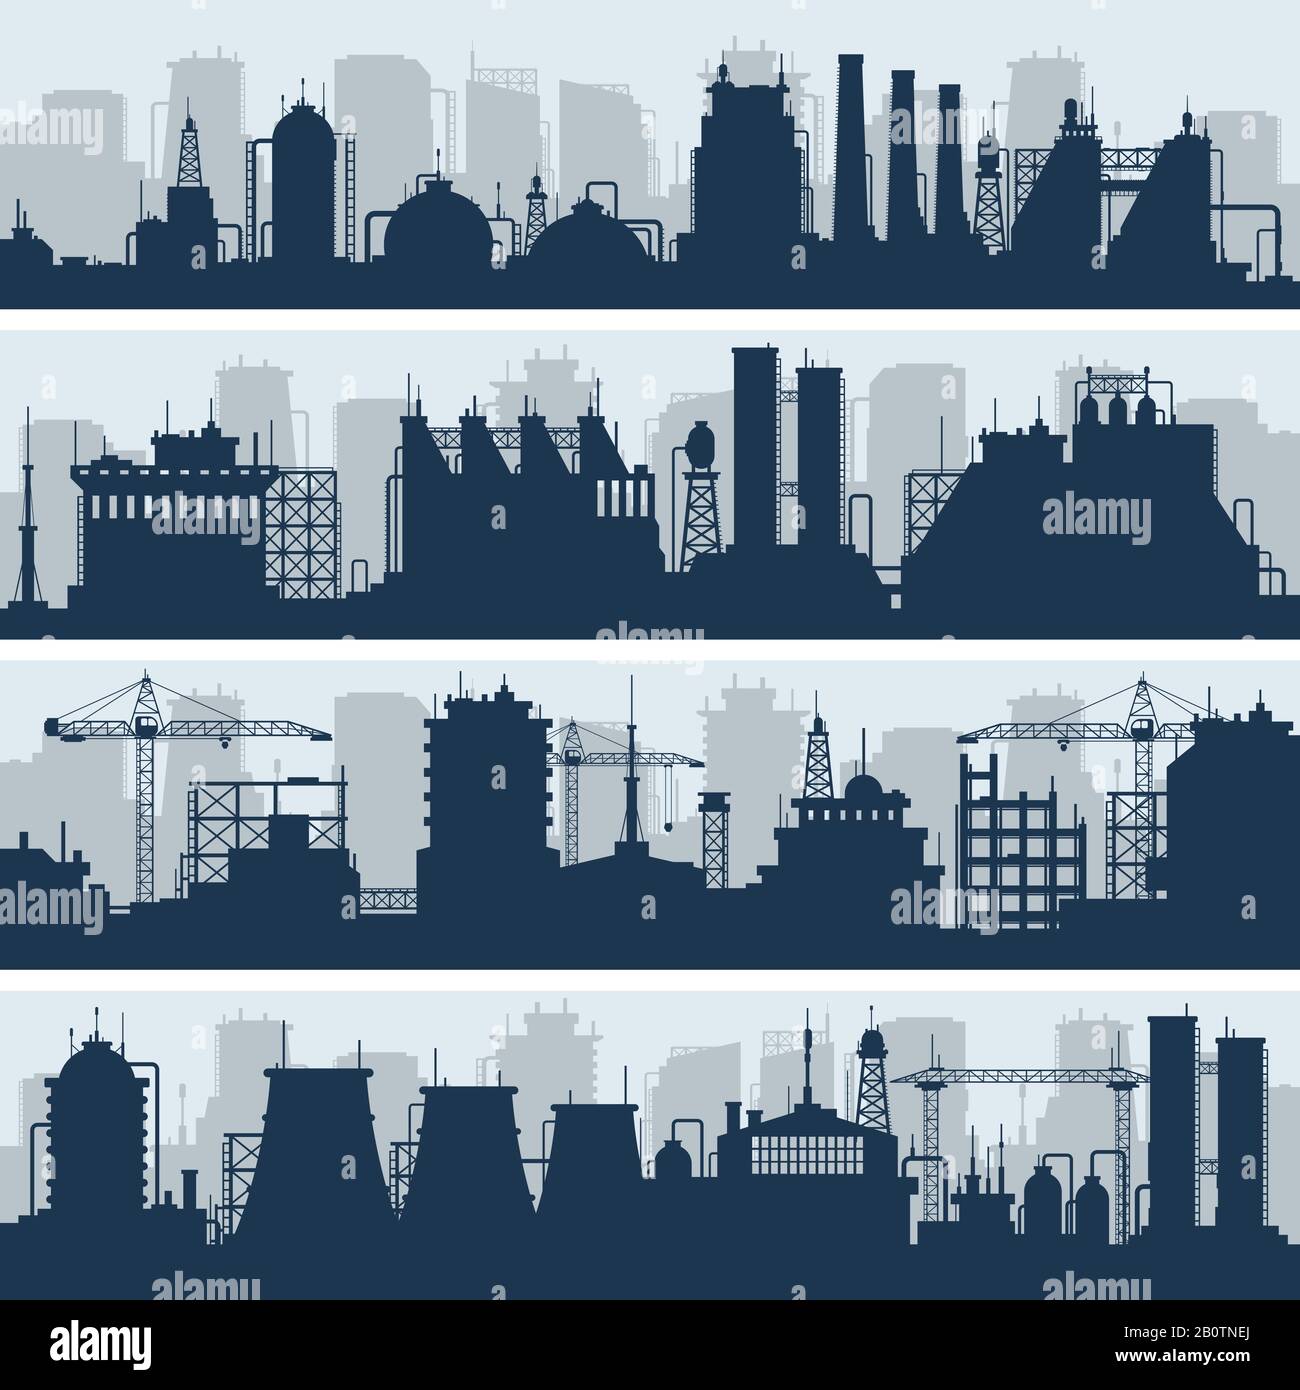 Industrial vector skylines. Modern factory and works building silhouettes. Urban industry factory and plant structure illustration Stock Vector